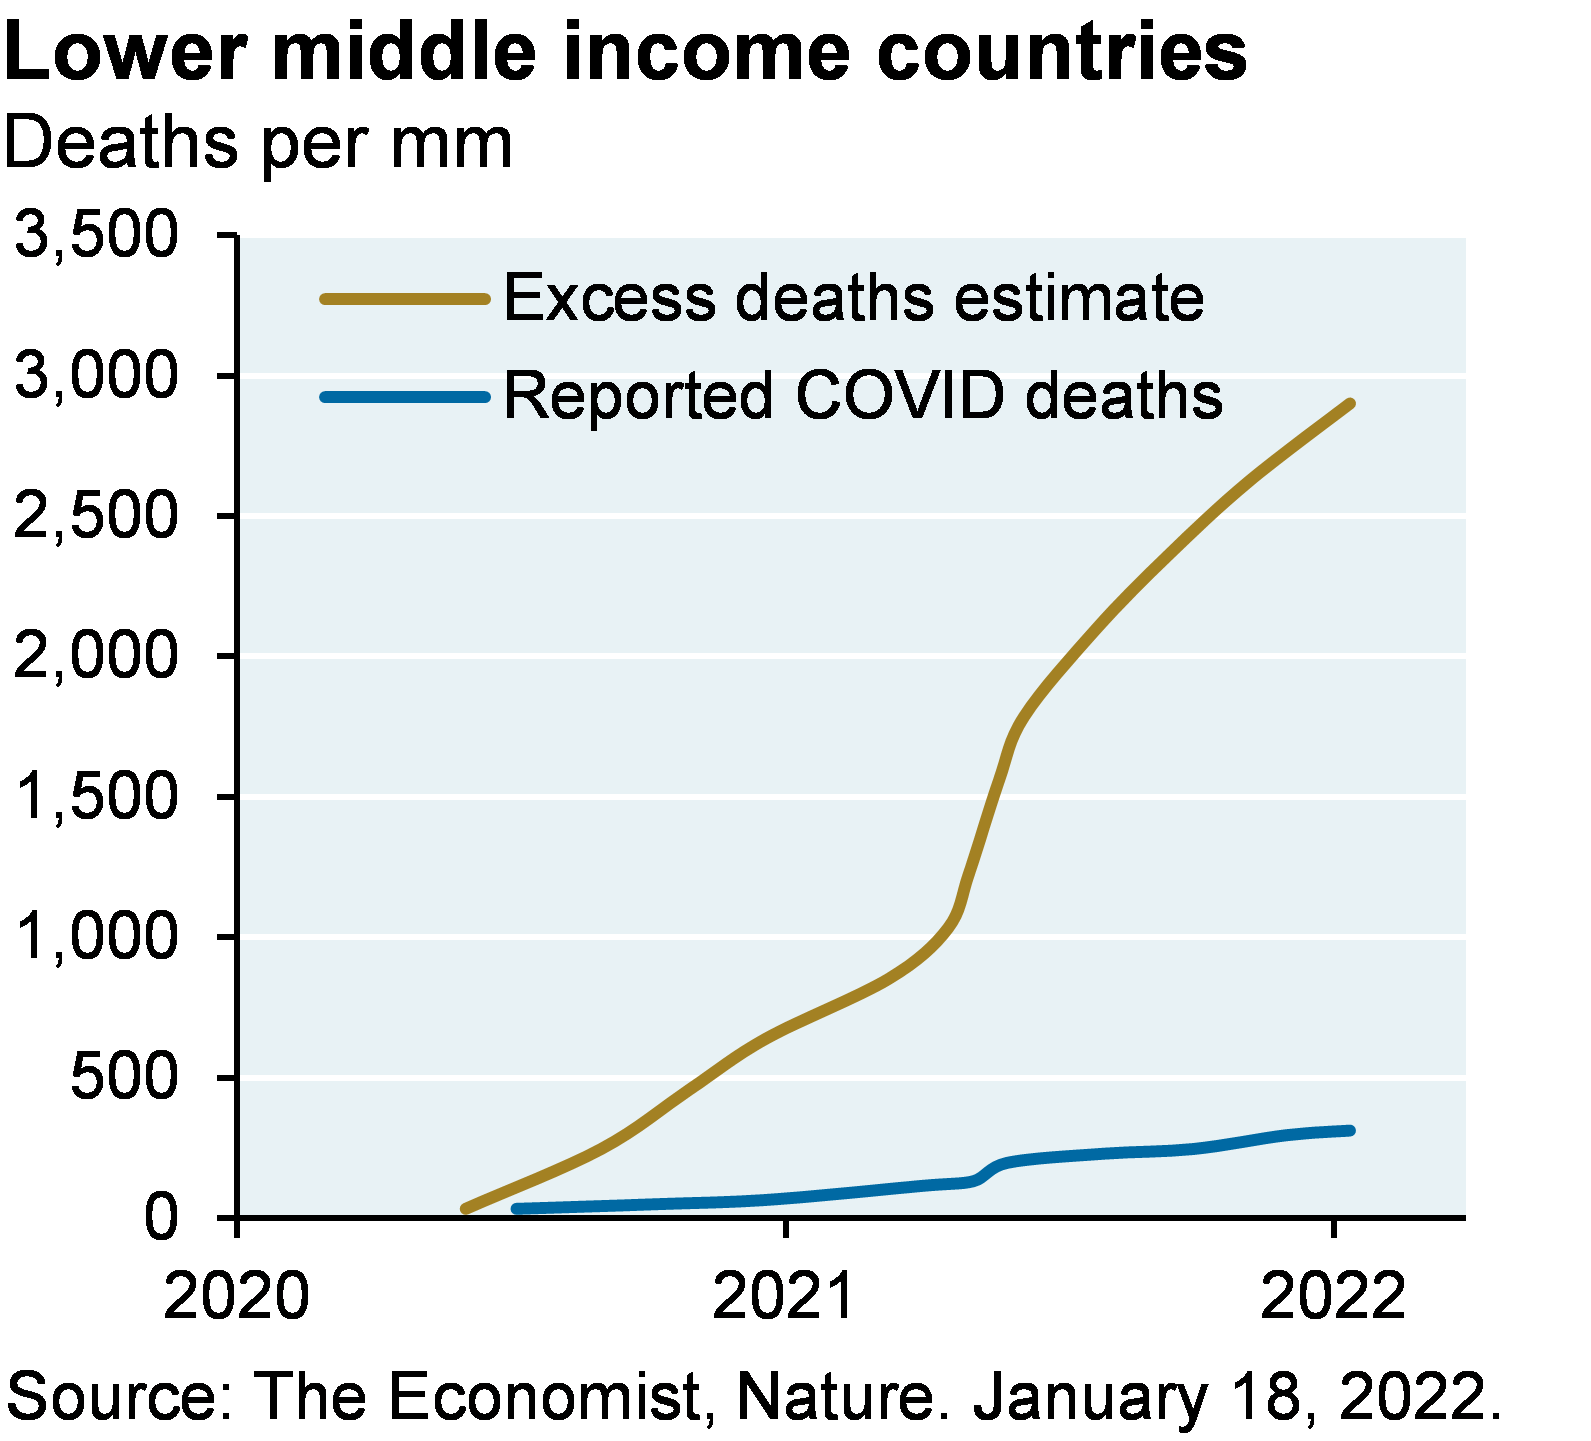 Line chart shows an excess deaths estimate vs reported COVID deaths among lower middle income countries, shown as deaths per mm. Chart shows excess deaths are estimated at nearly 3,000 per mm, with reported COVID deaths below 500 per mm.